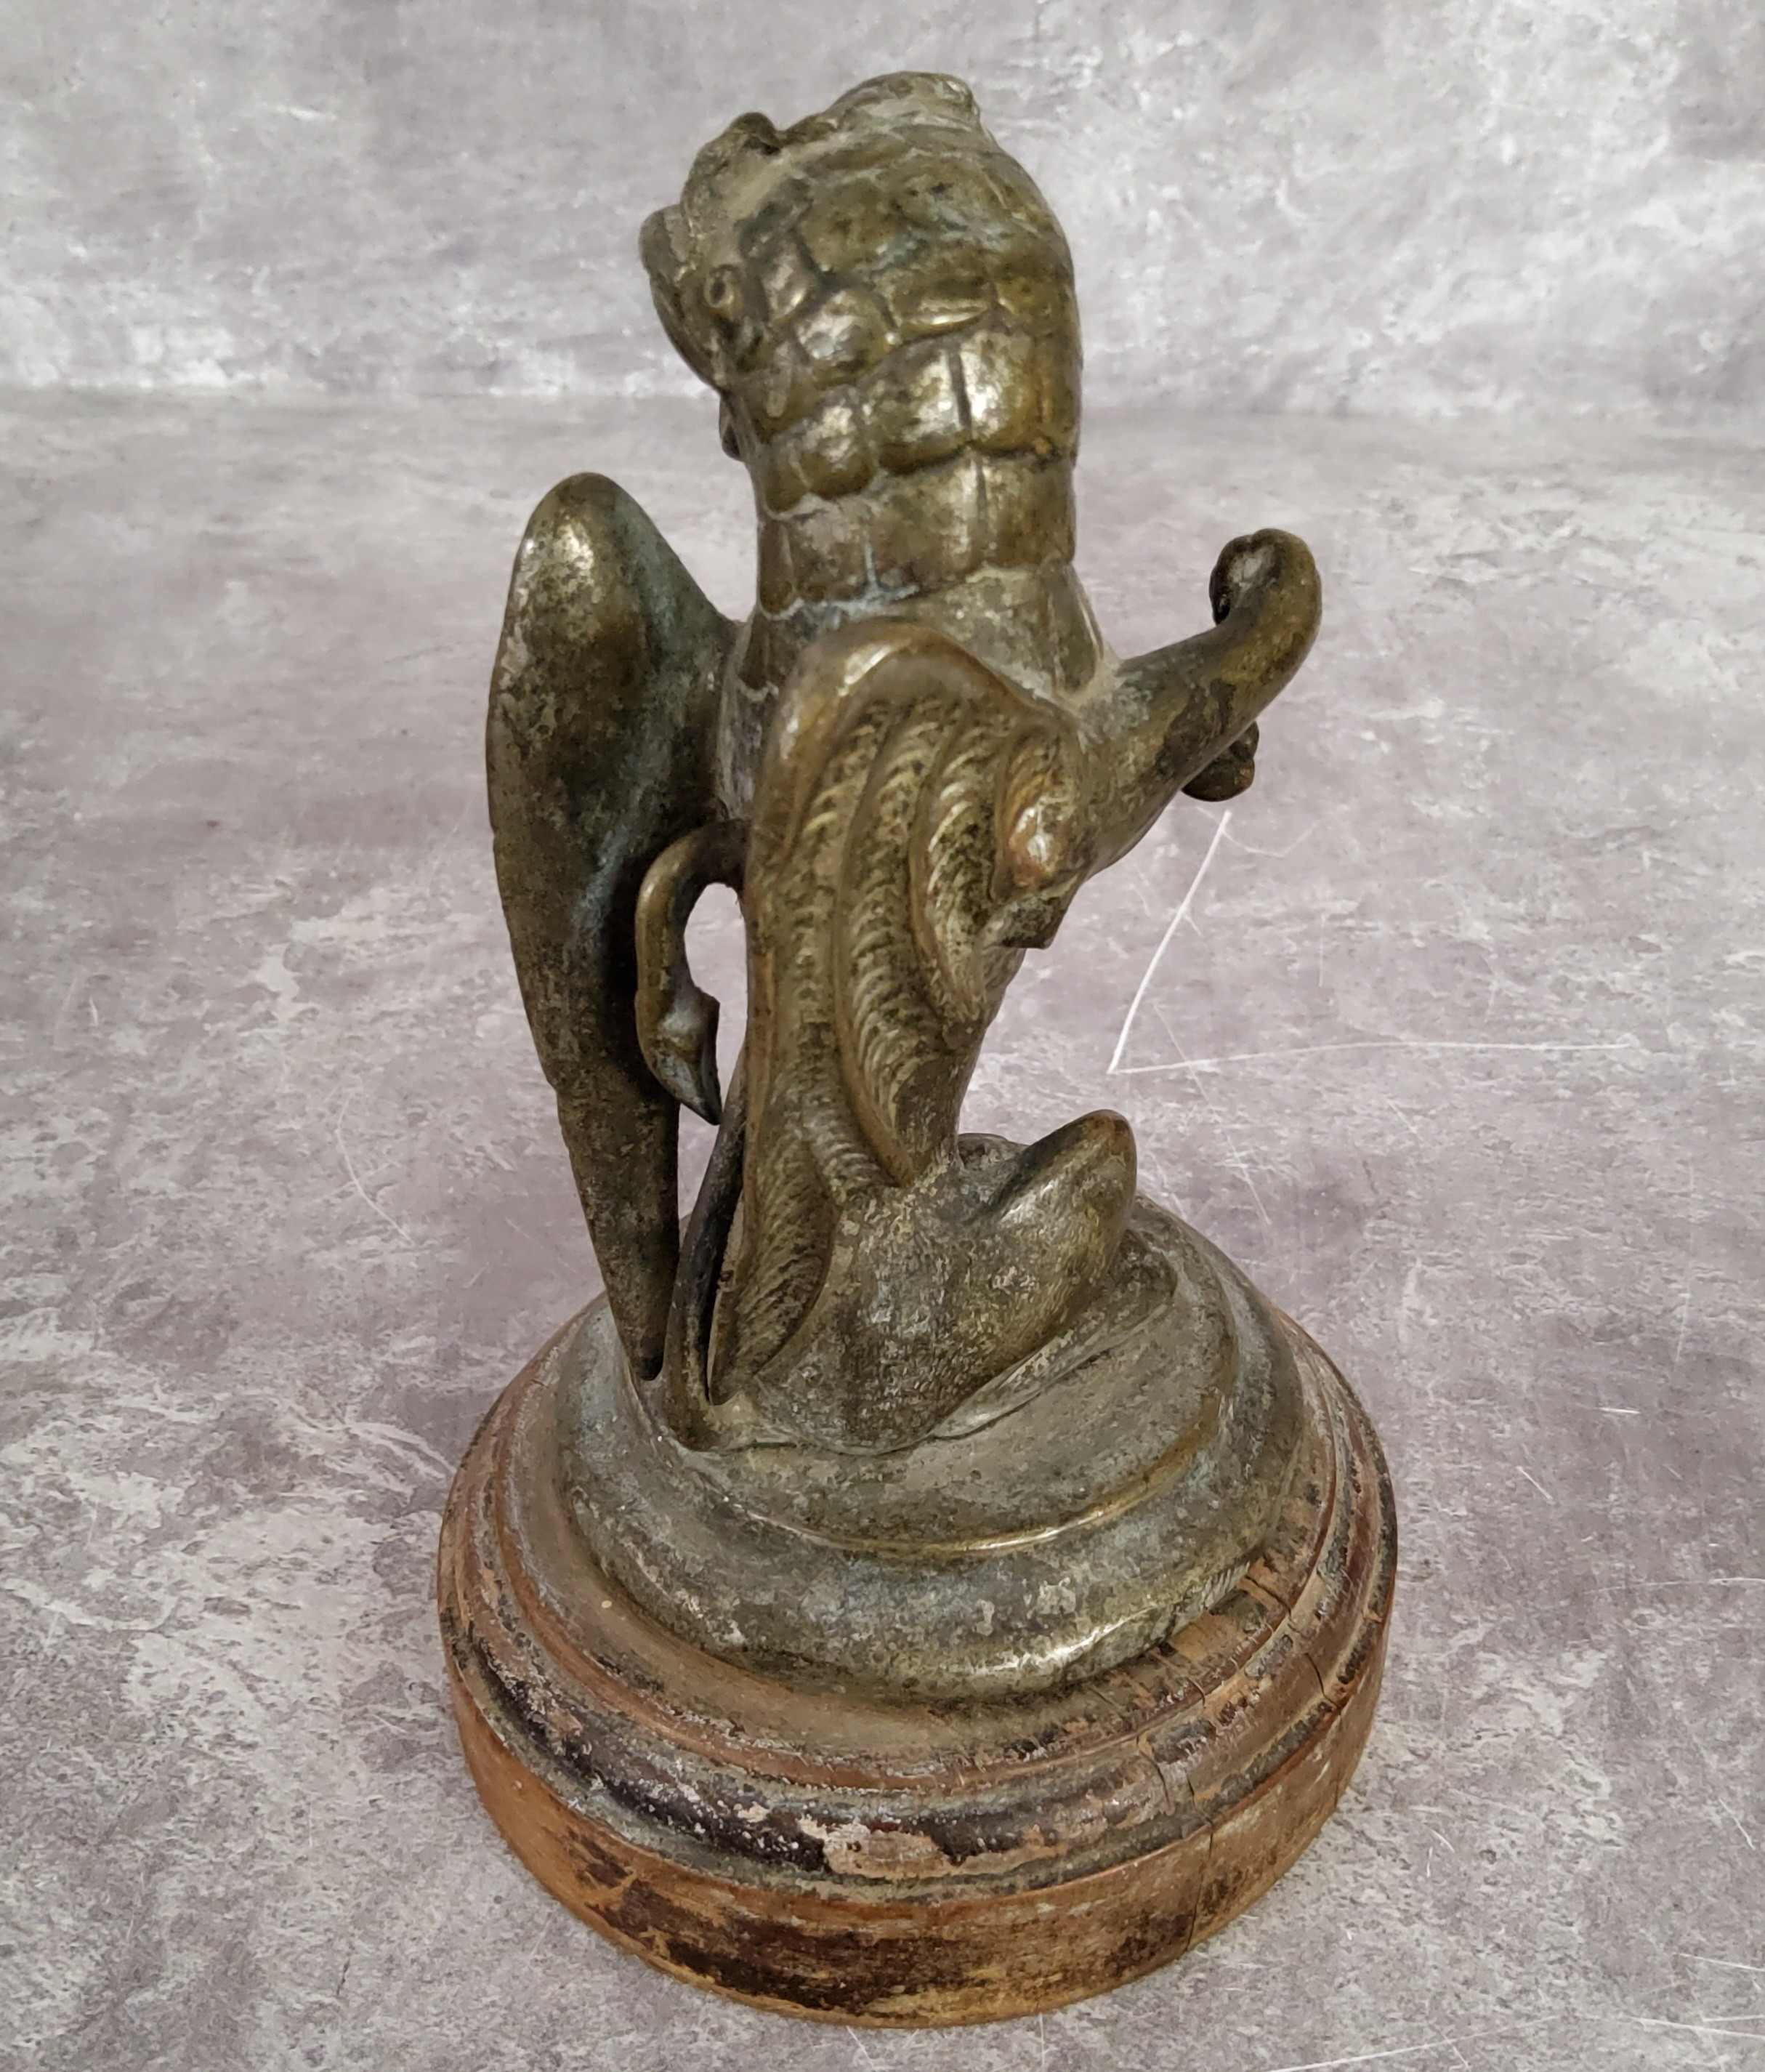 Automobilia - A bronze car mascot in the form of a seated Gryphon / griffin with folded wings - Image 2 of 3